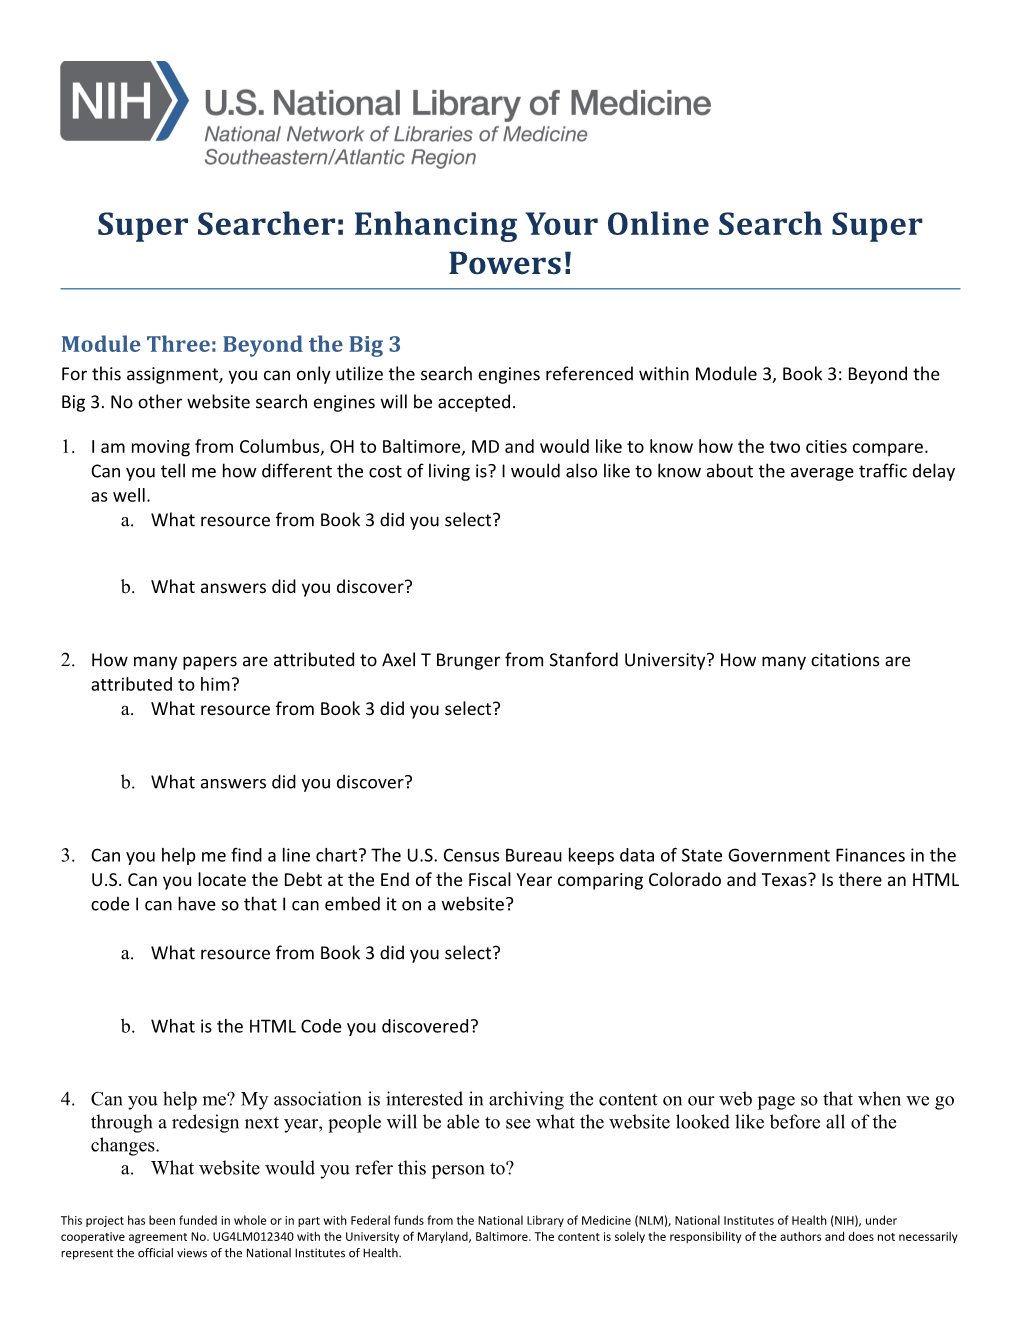 Super Searcher: Enhancing Your Online Search Super Powers!